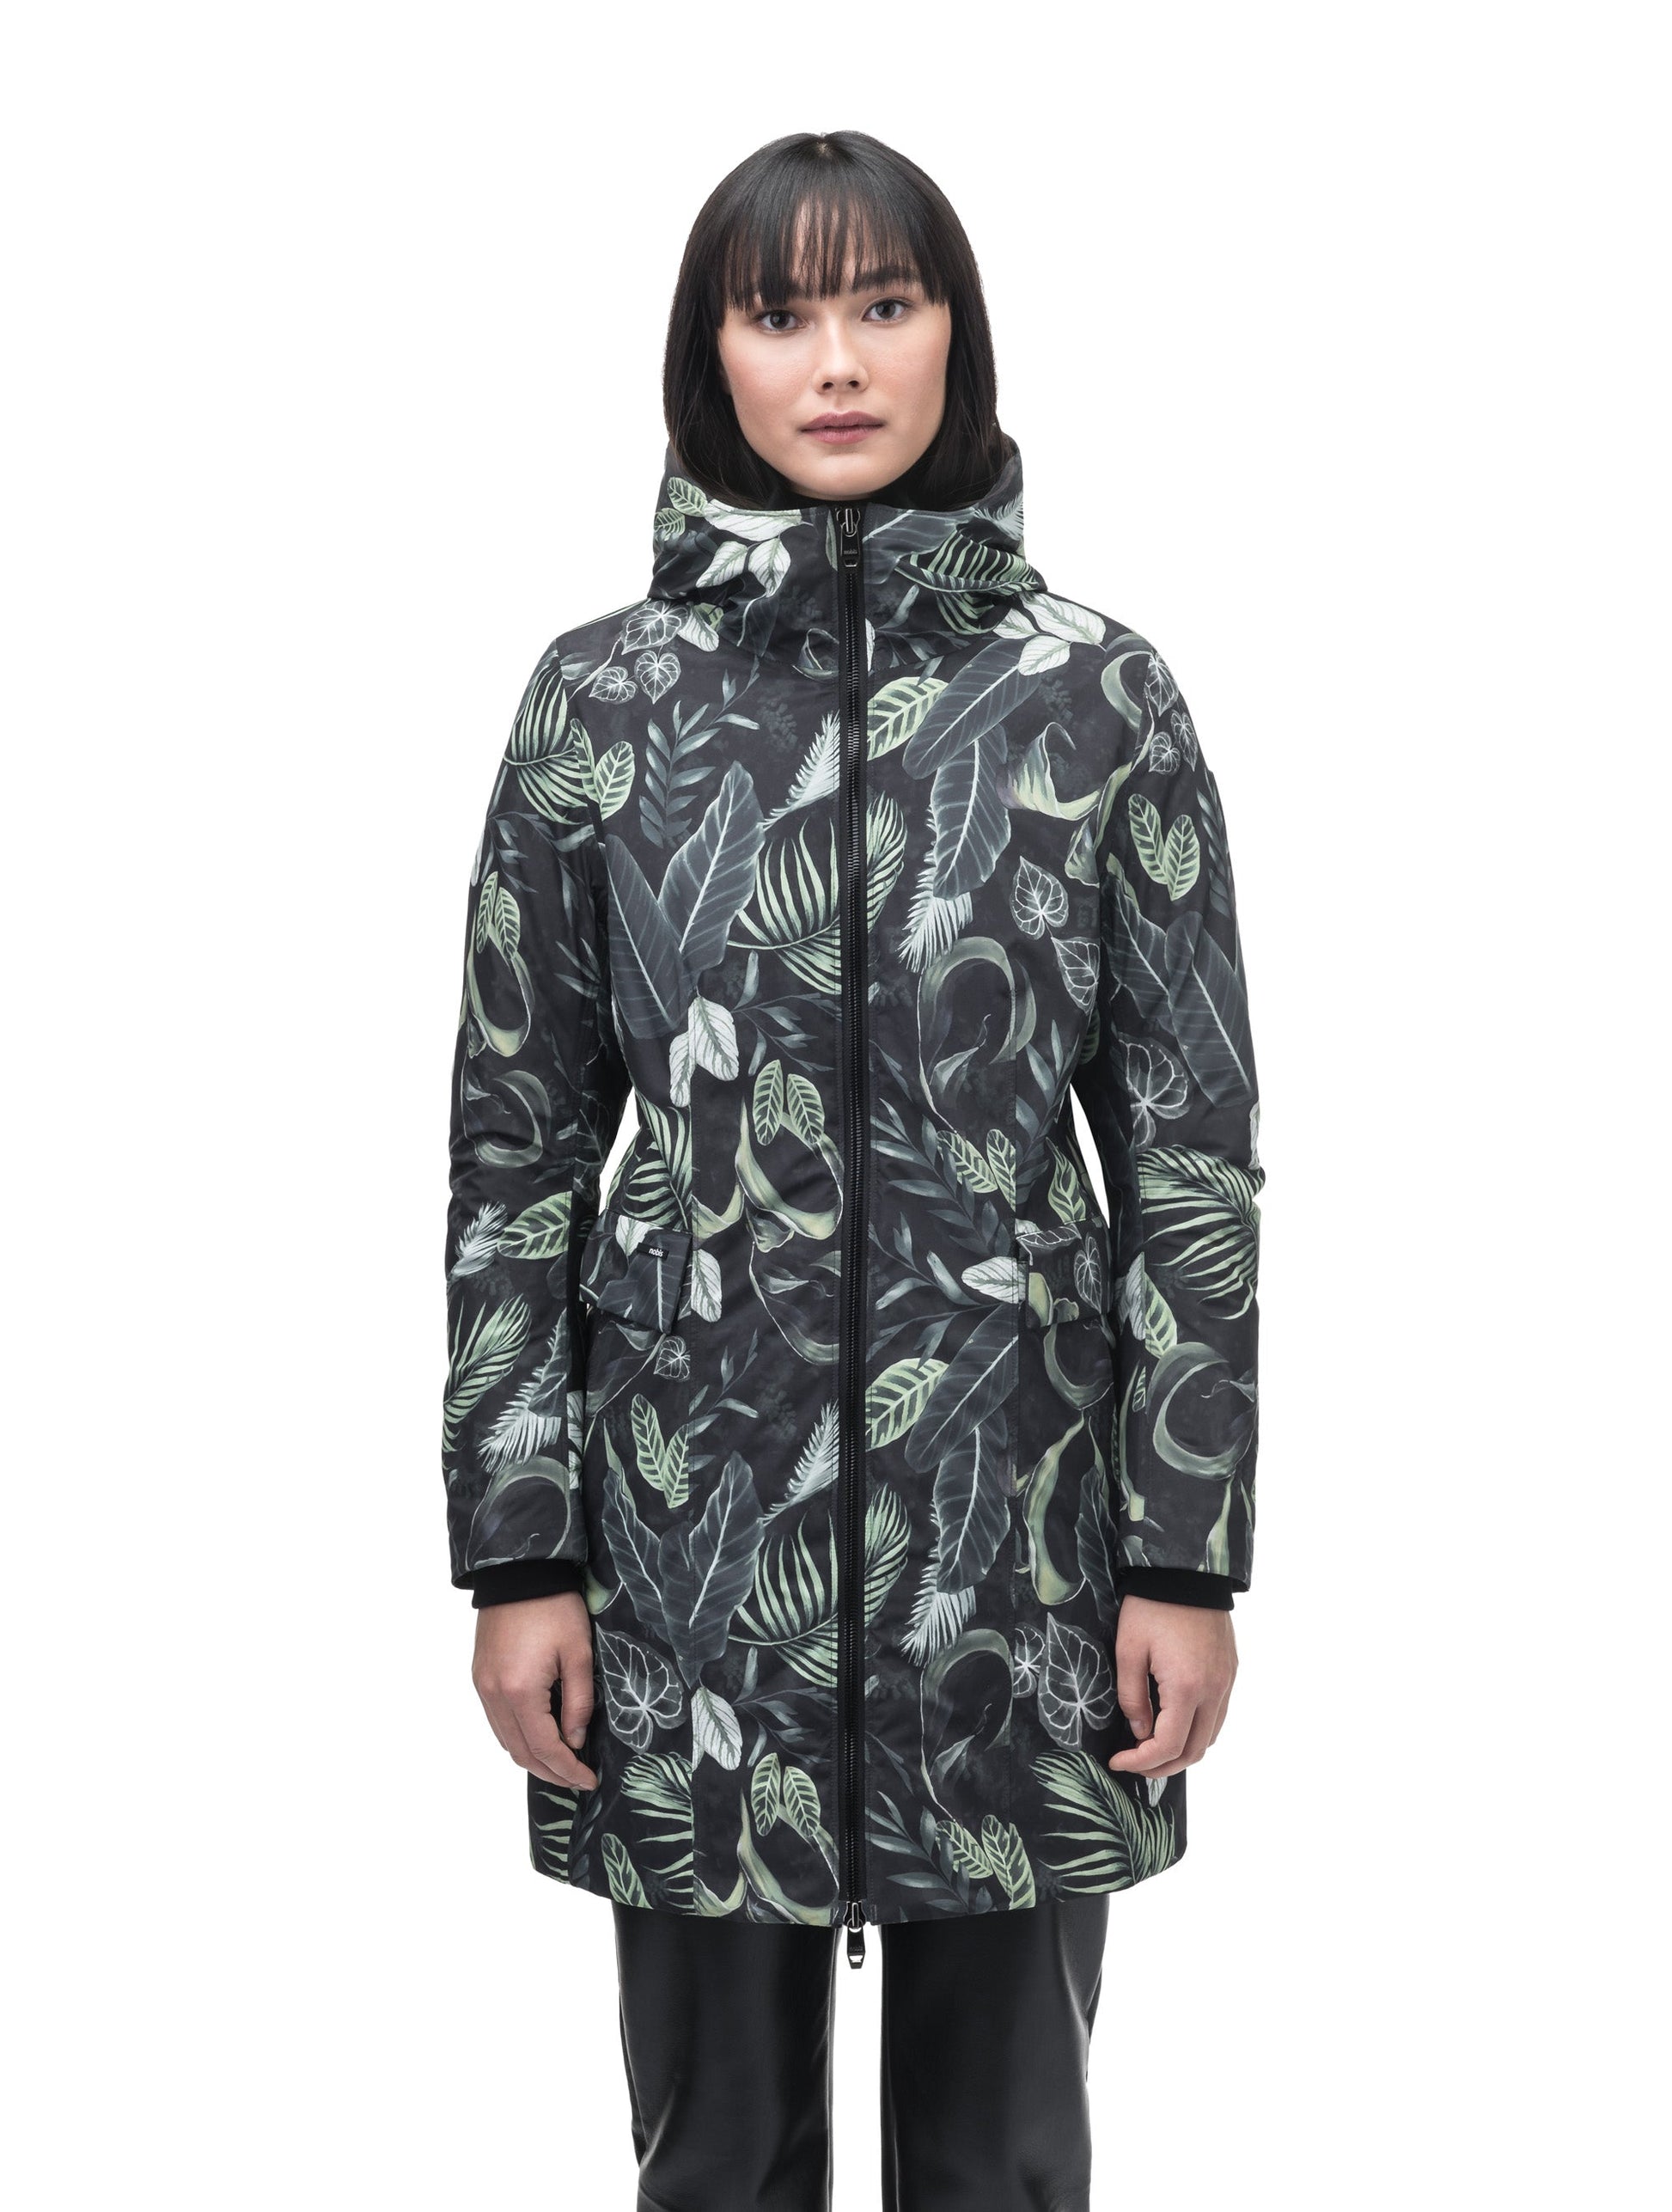 Romeda Ladies Mid Thigh Parka in thigh length, Canadian duck down insulation, non-removable hood with removable fur ruff trim, and two-way front zipper, in Foliage